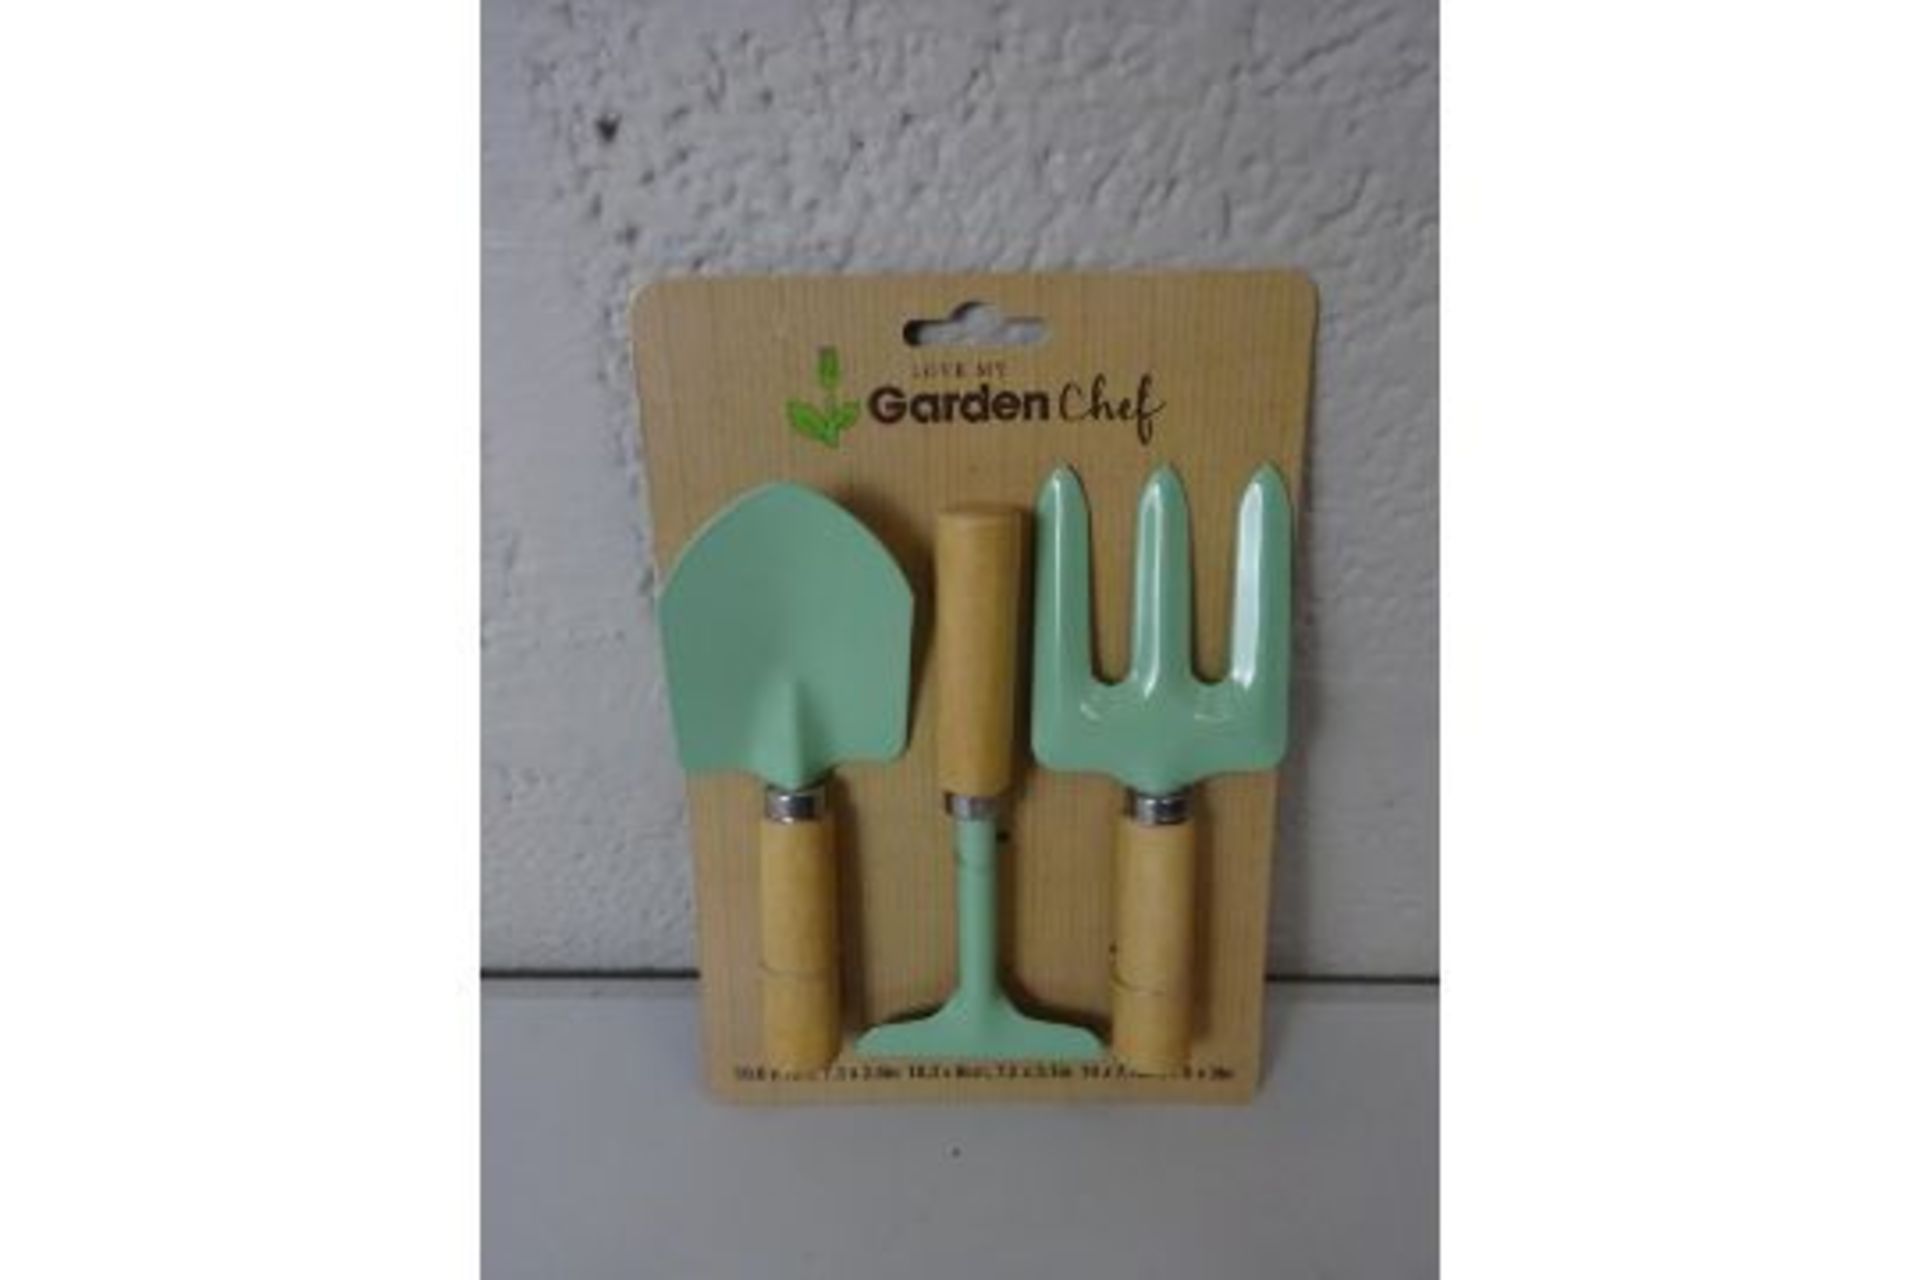 X2 BRAND NEW MINI GARDEN SETS WITH SPADE, RAKE AND FORK SETS